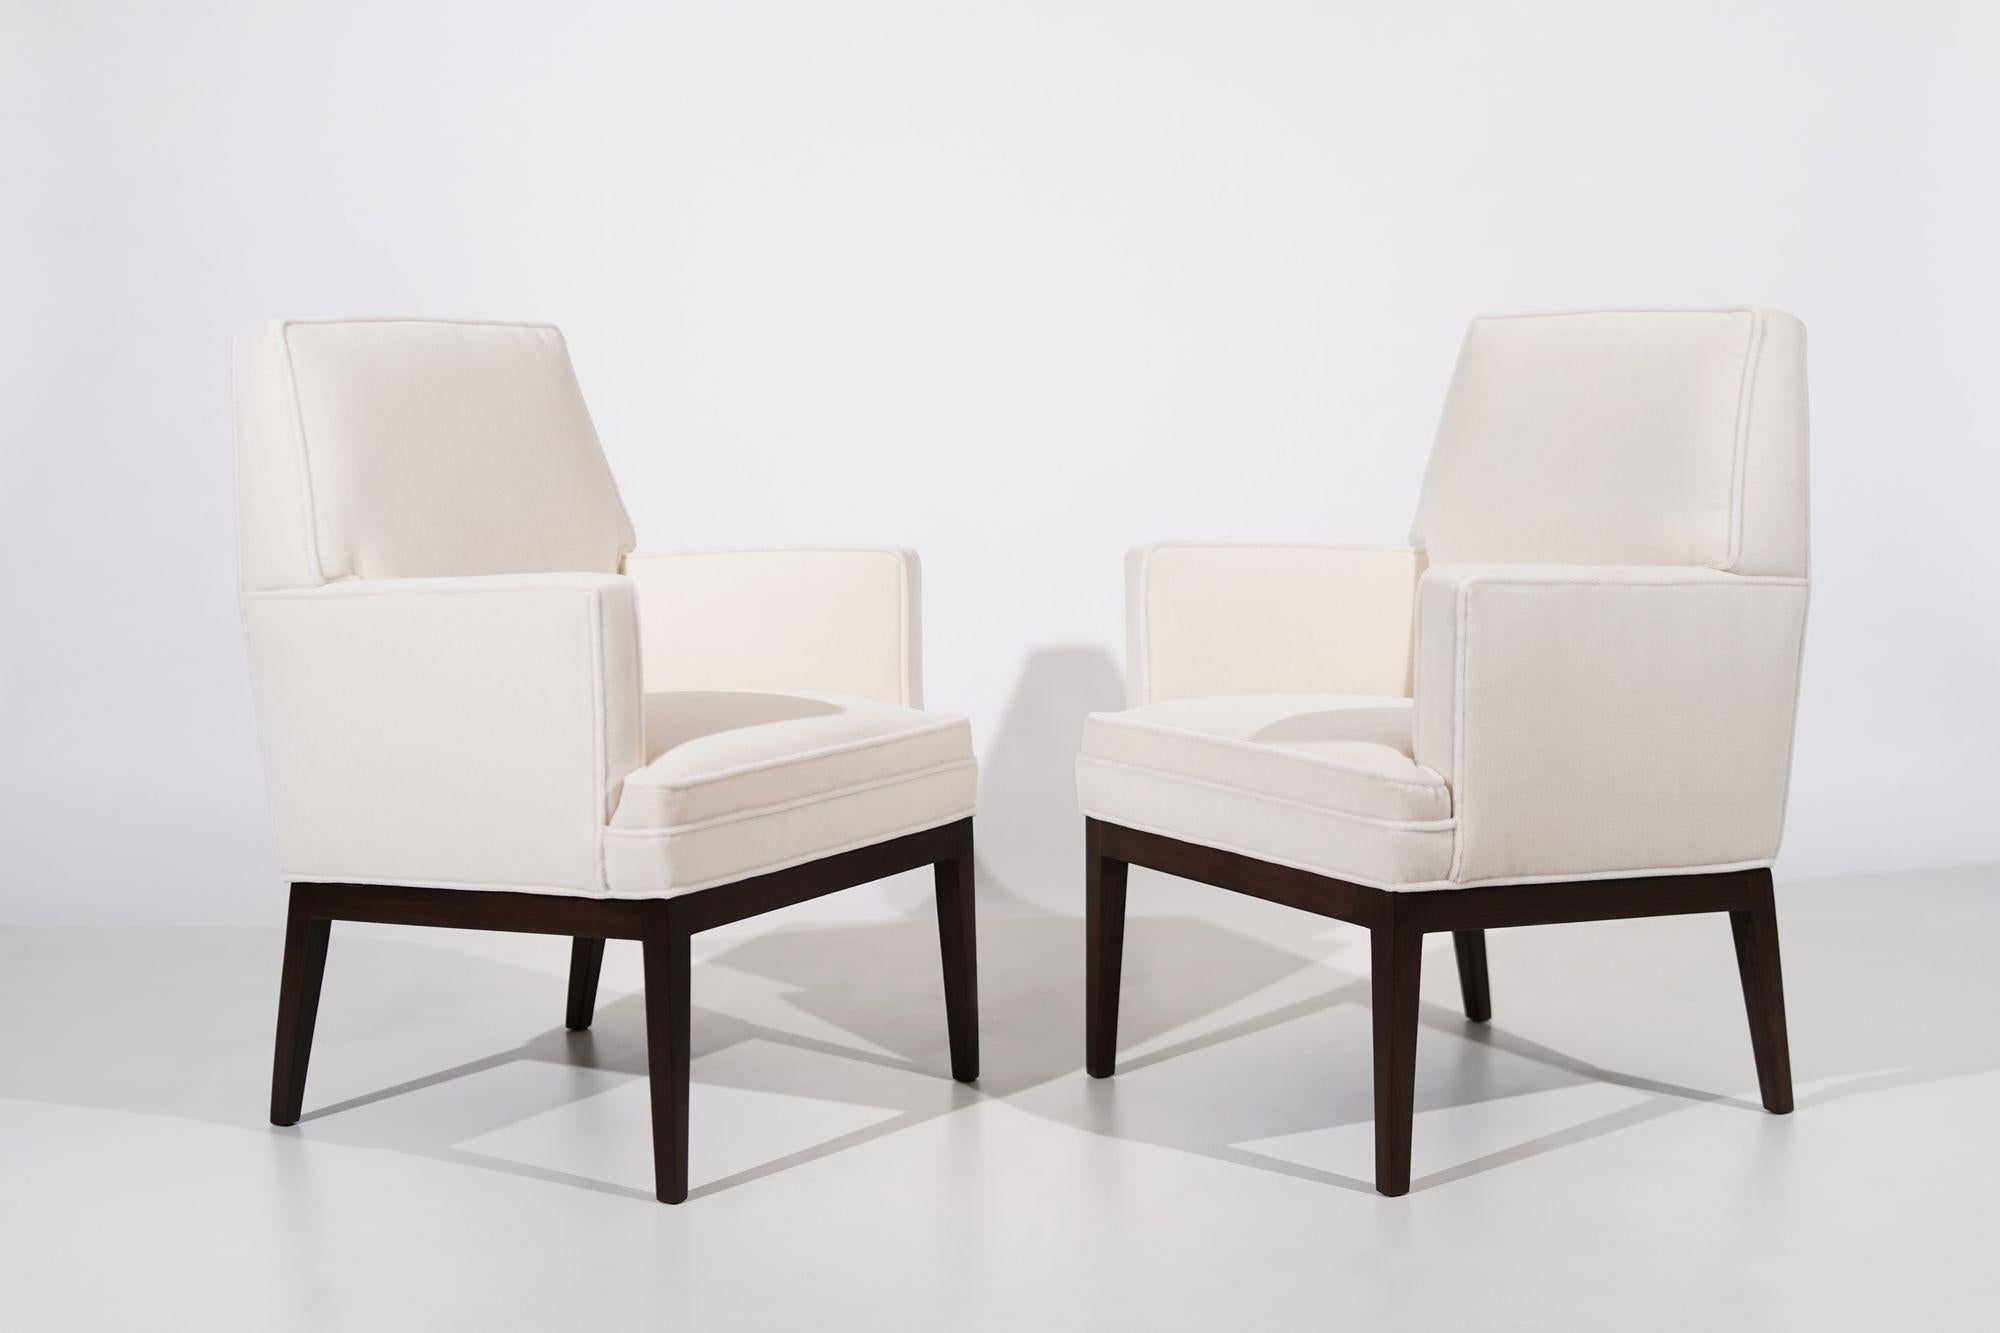 Discover the timeless allure of a rare set of club chairs designed by Jens Risom in the late 1960s, now meticulously restored for a contemporary touch. The walnut legs have undergone a complete restoration, ensuring their original beauty shines